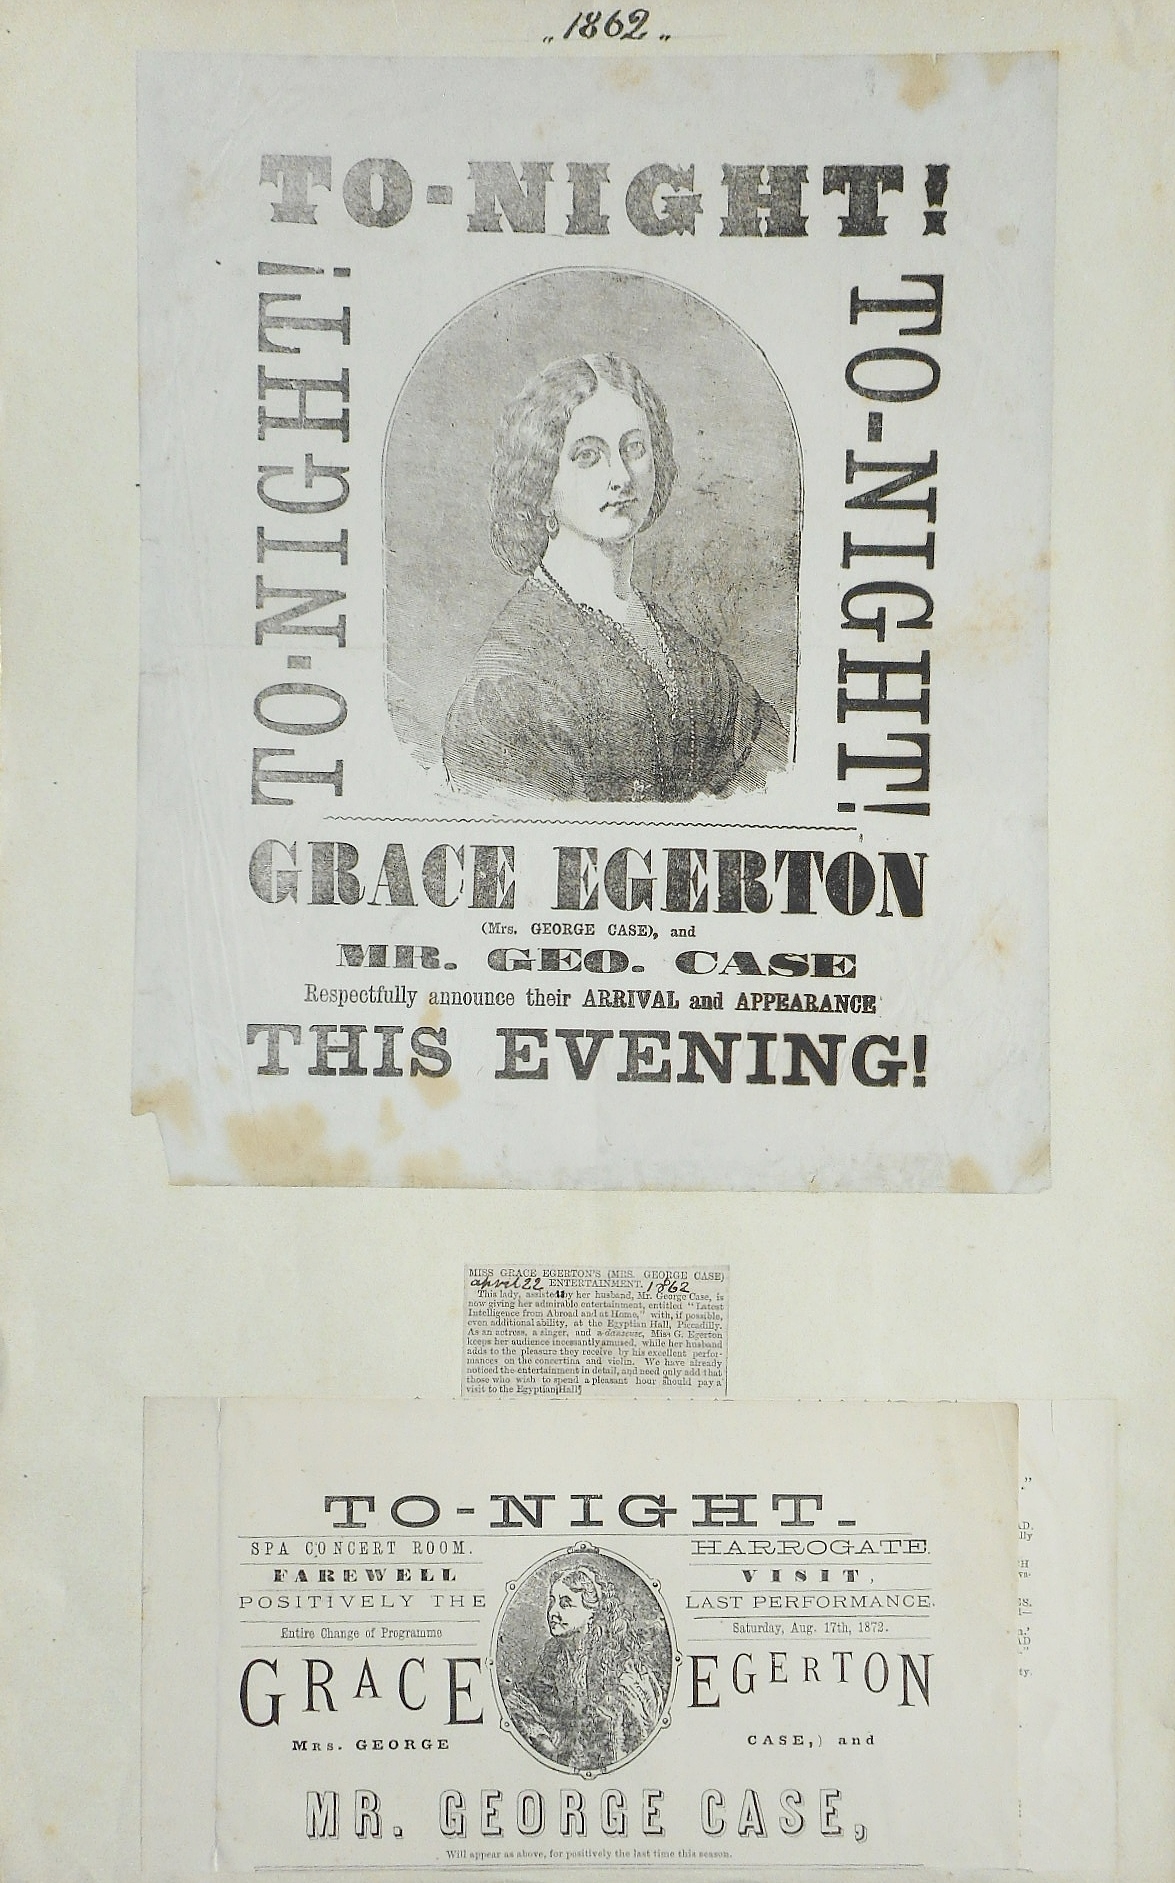 Grace Egerton and George Case perform at The Egyptian Hall and Spa Concert Room, Harrogate. 19th century